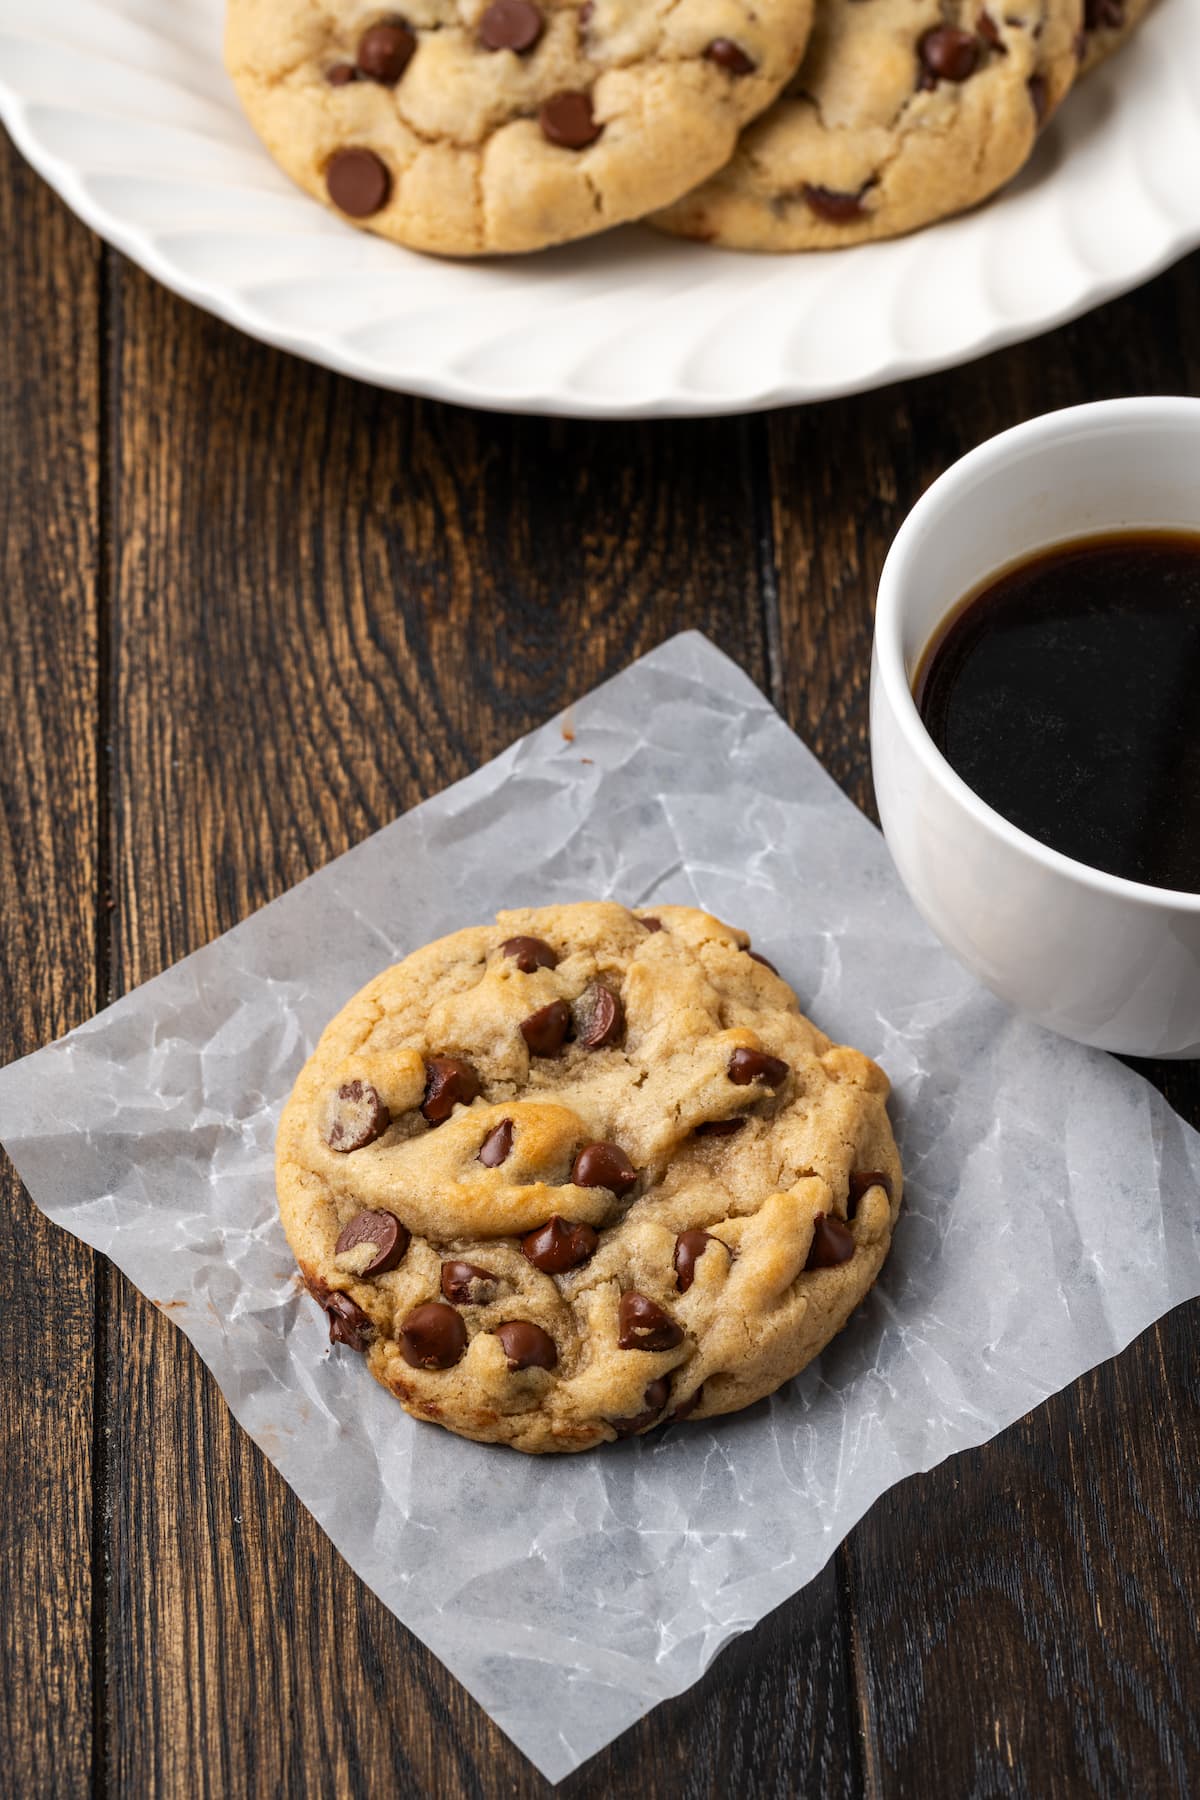 A chocolate chip Subway cookie on a piece of parchment paper next to a cup of coffee, with more cookies on a white plate in the background.